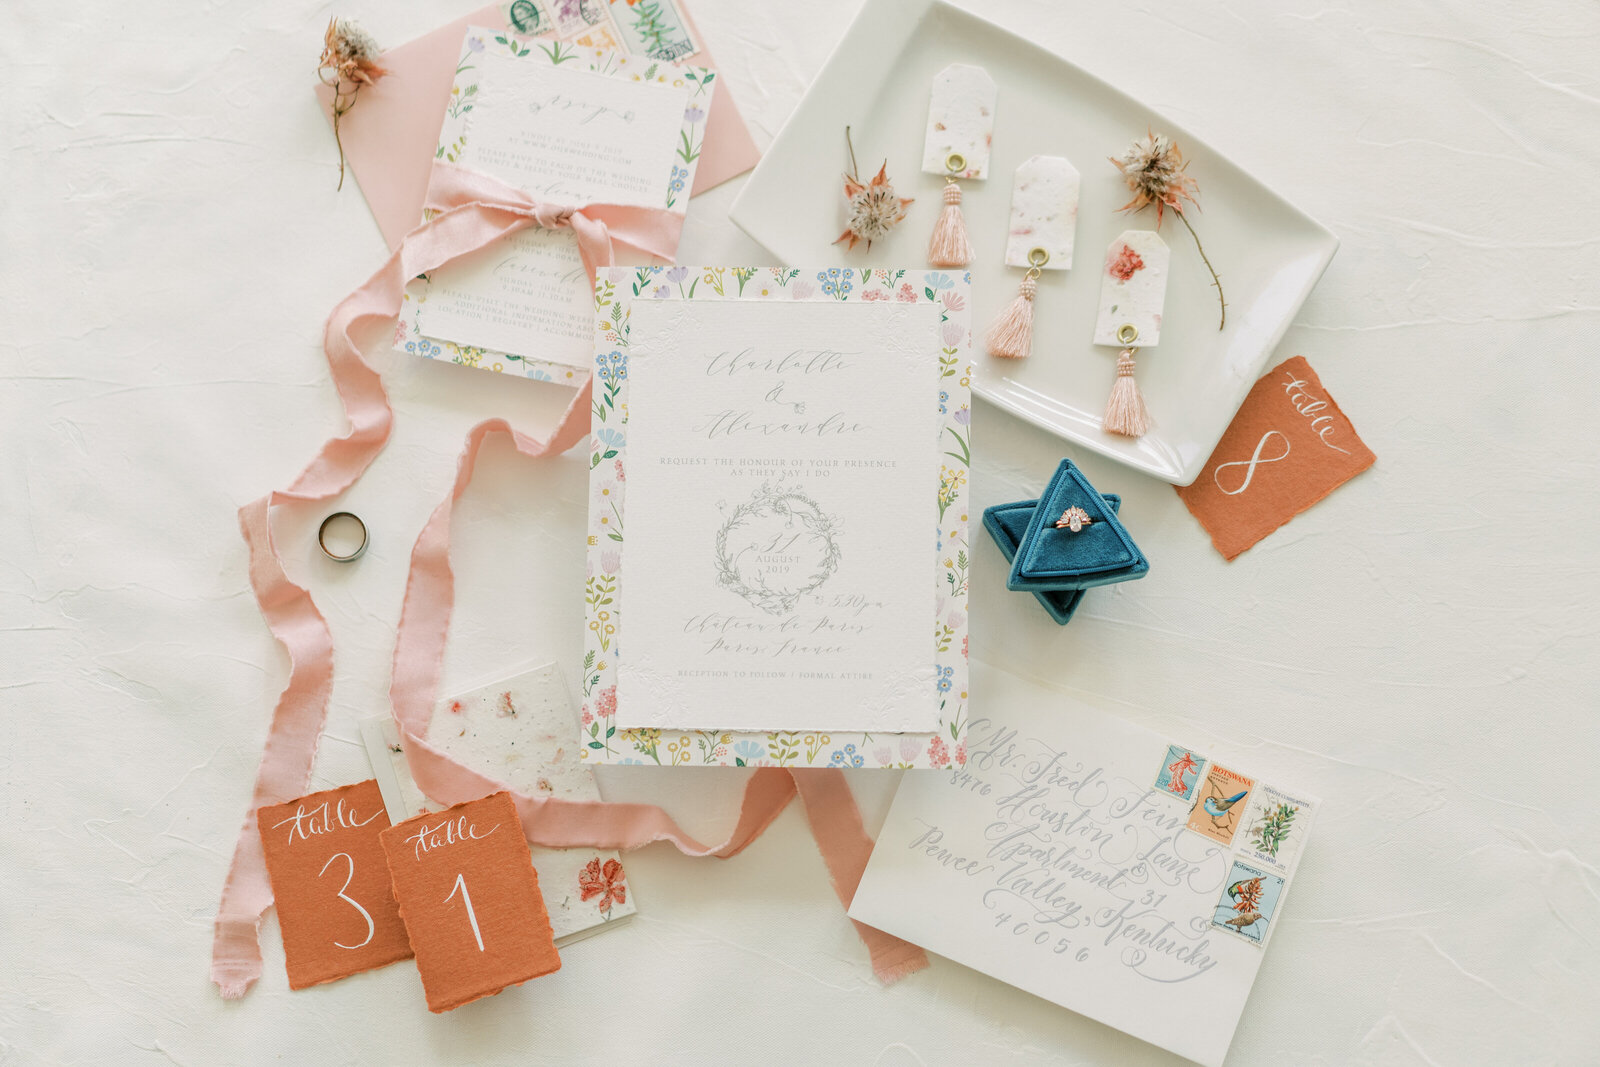 Wedding stationery on floral and white card stock with gray font atop a white table with flowers, a jewelry box, and ribbon.